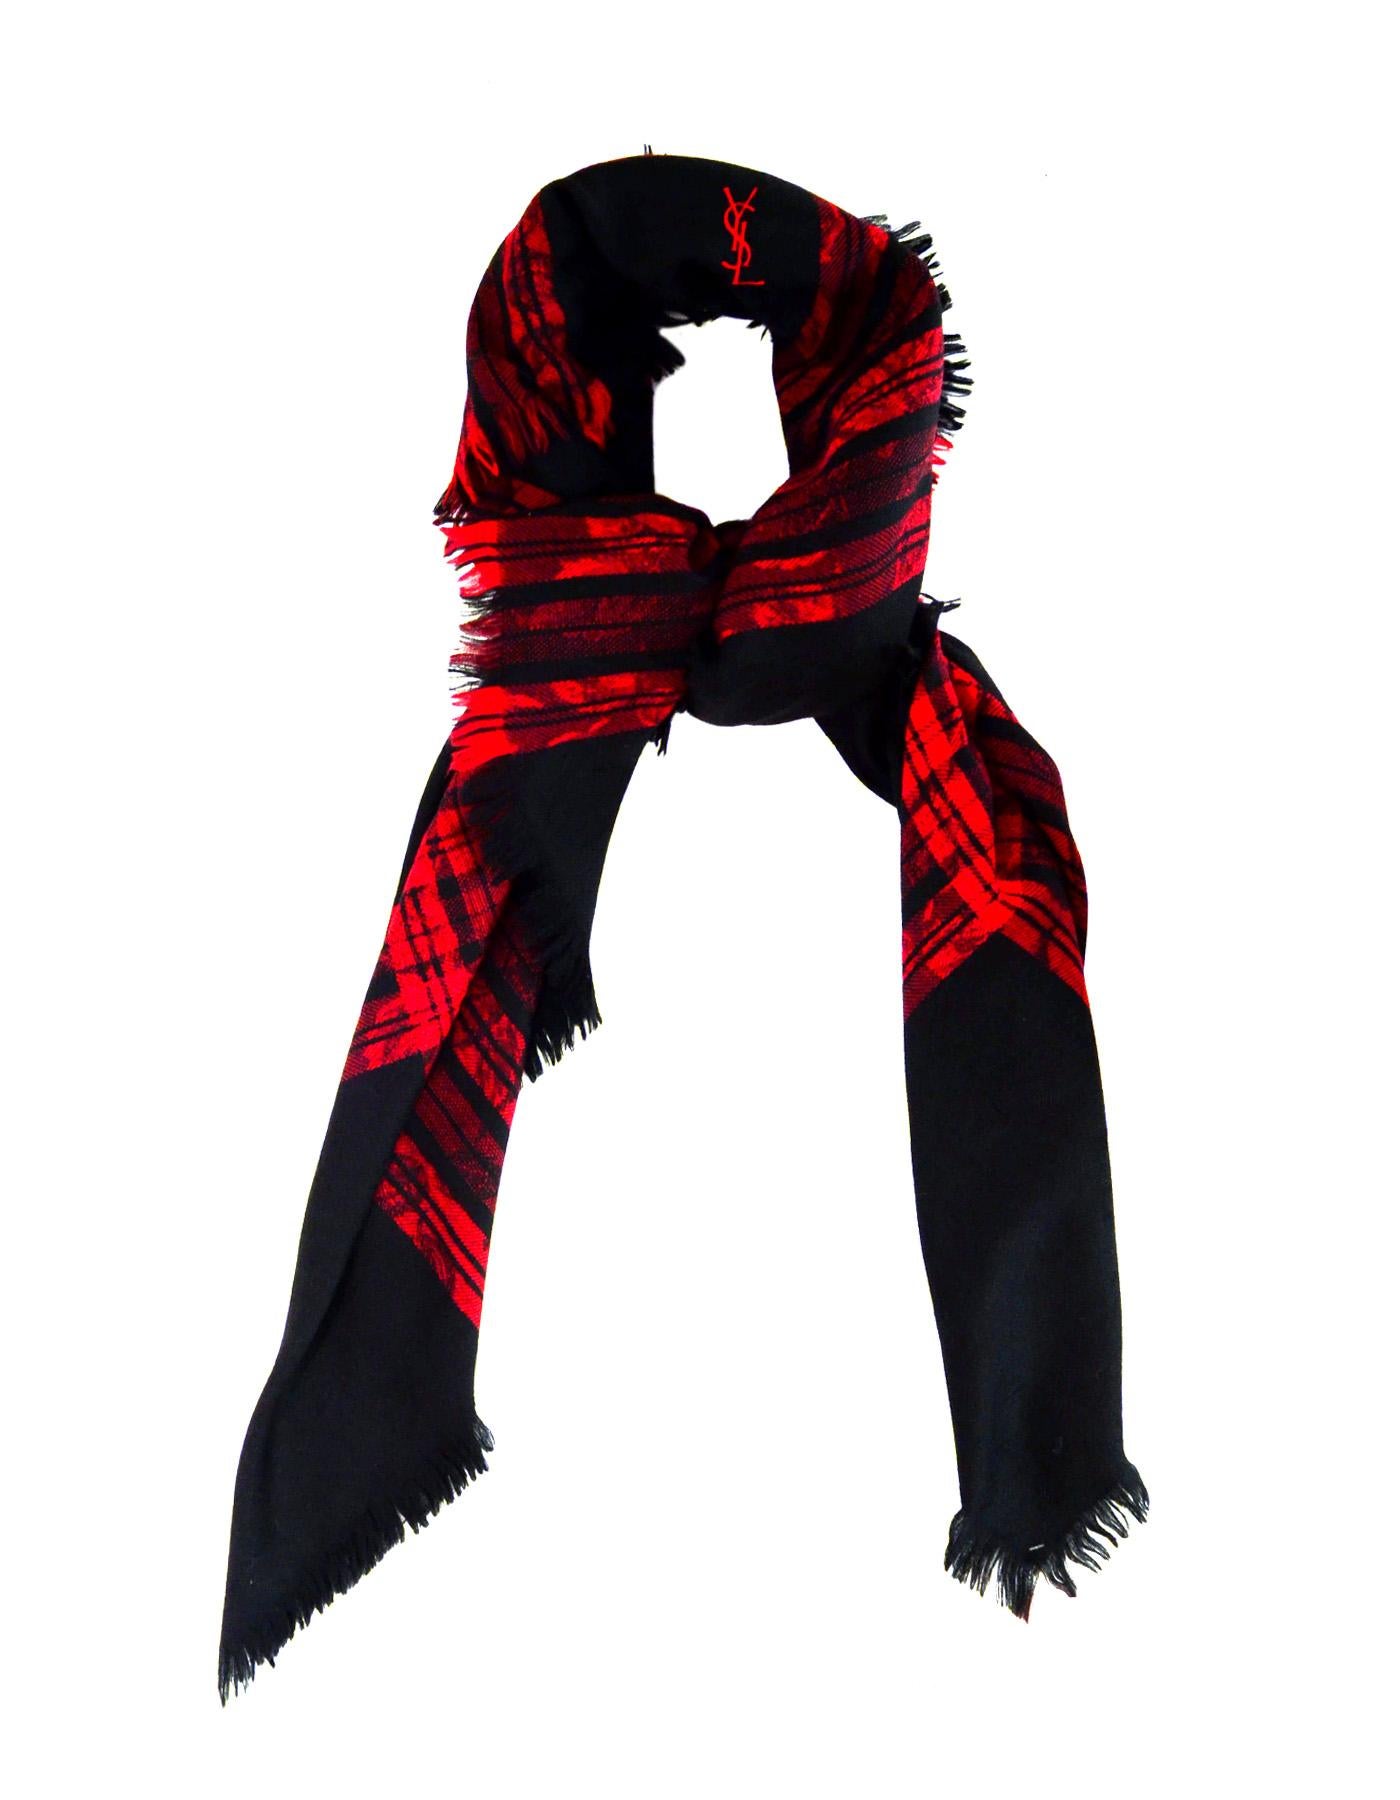 Yves Saint Laurent YSL Vintage Red/Black Jacquard Plaid Tartan Floral Wool Blanket Scarf  

Color: Red and black
Materials: no composition tag- wool 
Overall Condition: Excellent vintage pre-owned condition 
Measurements: 
58